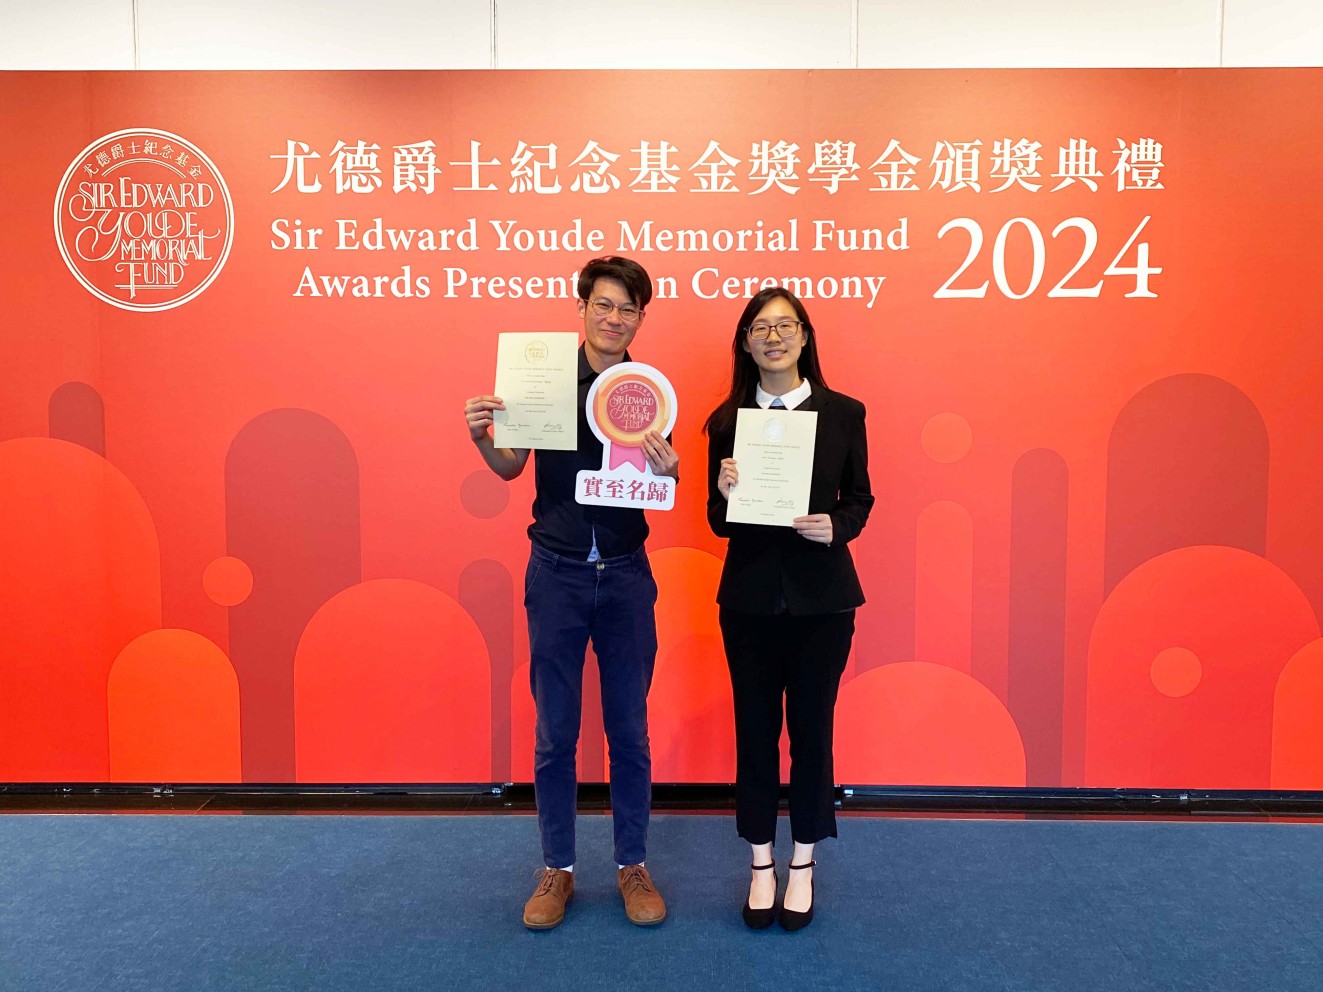  Desmond Tan Kai-teck, an MPhil student of Environmental Science (left), and Avivi Hau Wai-man, a final-year undergraduate student of Chinese (right), receive this year's Sir Edward Youde Memorial Fellowship and Scholarship respectively.